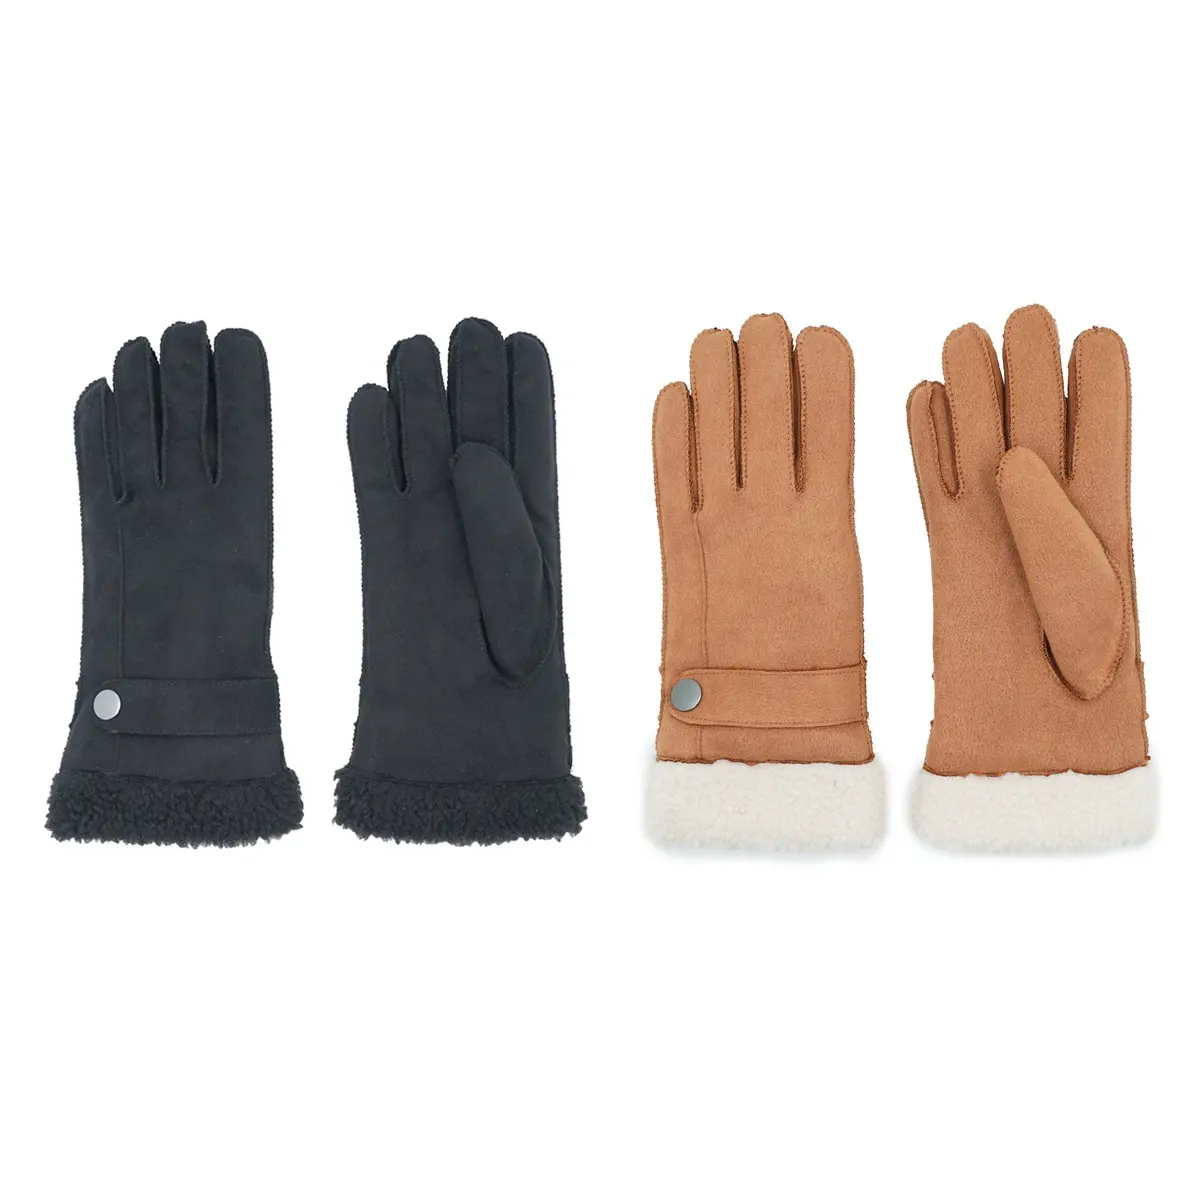 Hot Sell Winter Touch Screen Gloves Waterproof warm Gloves Cycling Outdoor Gloves Mittens For Men Women